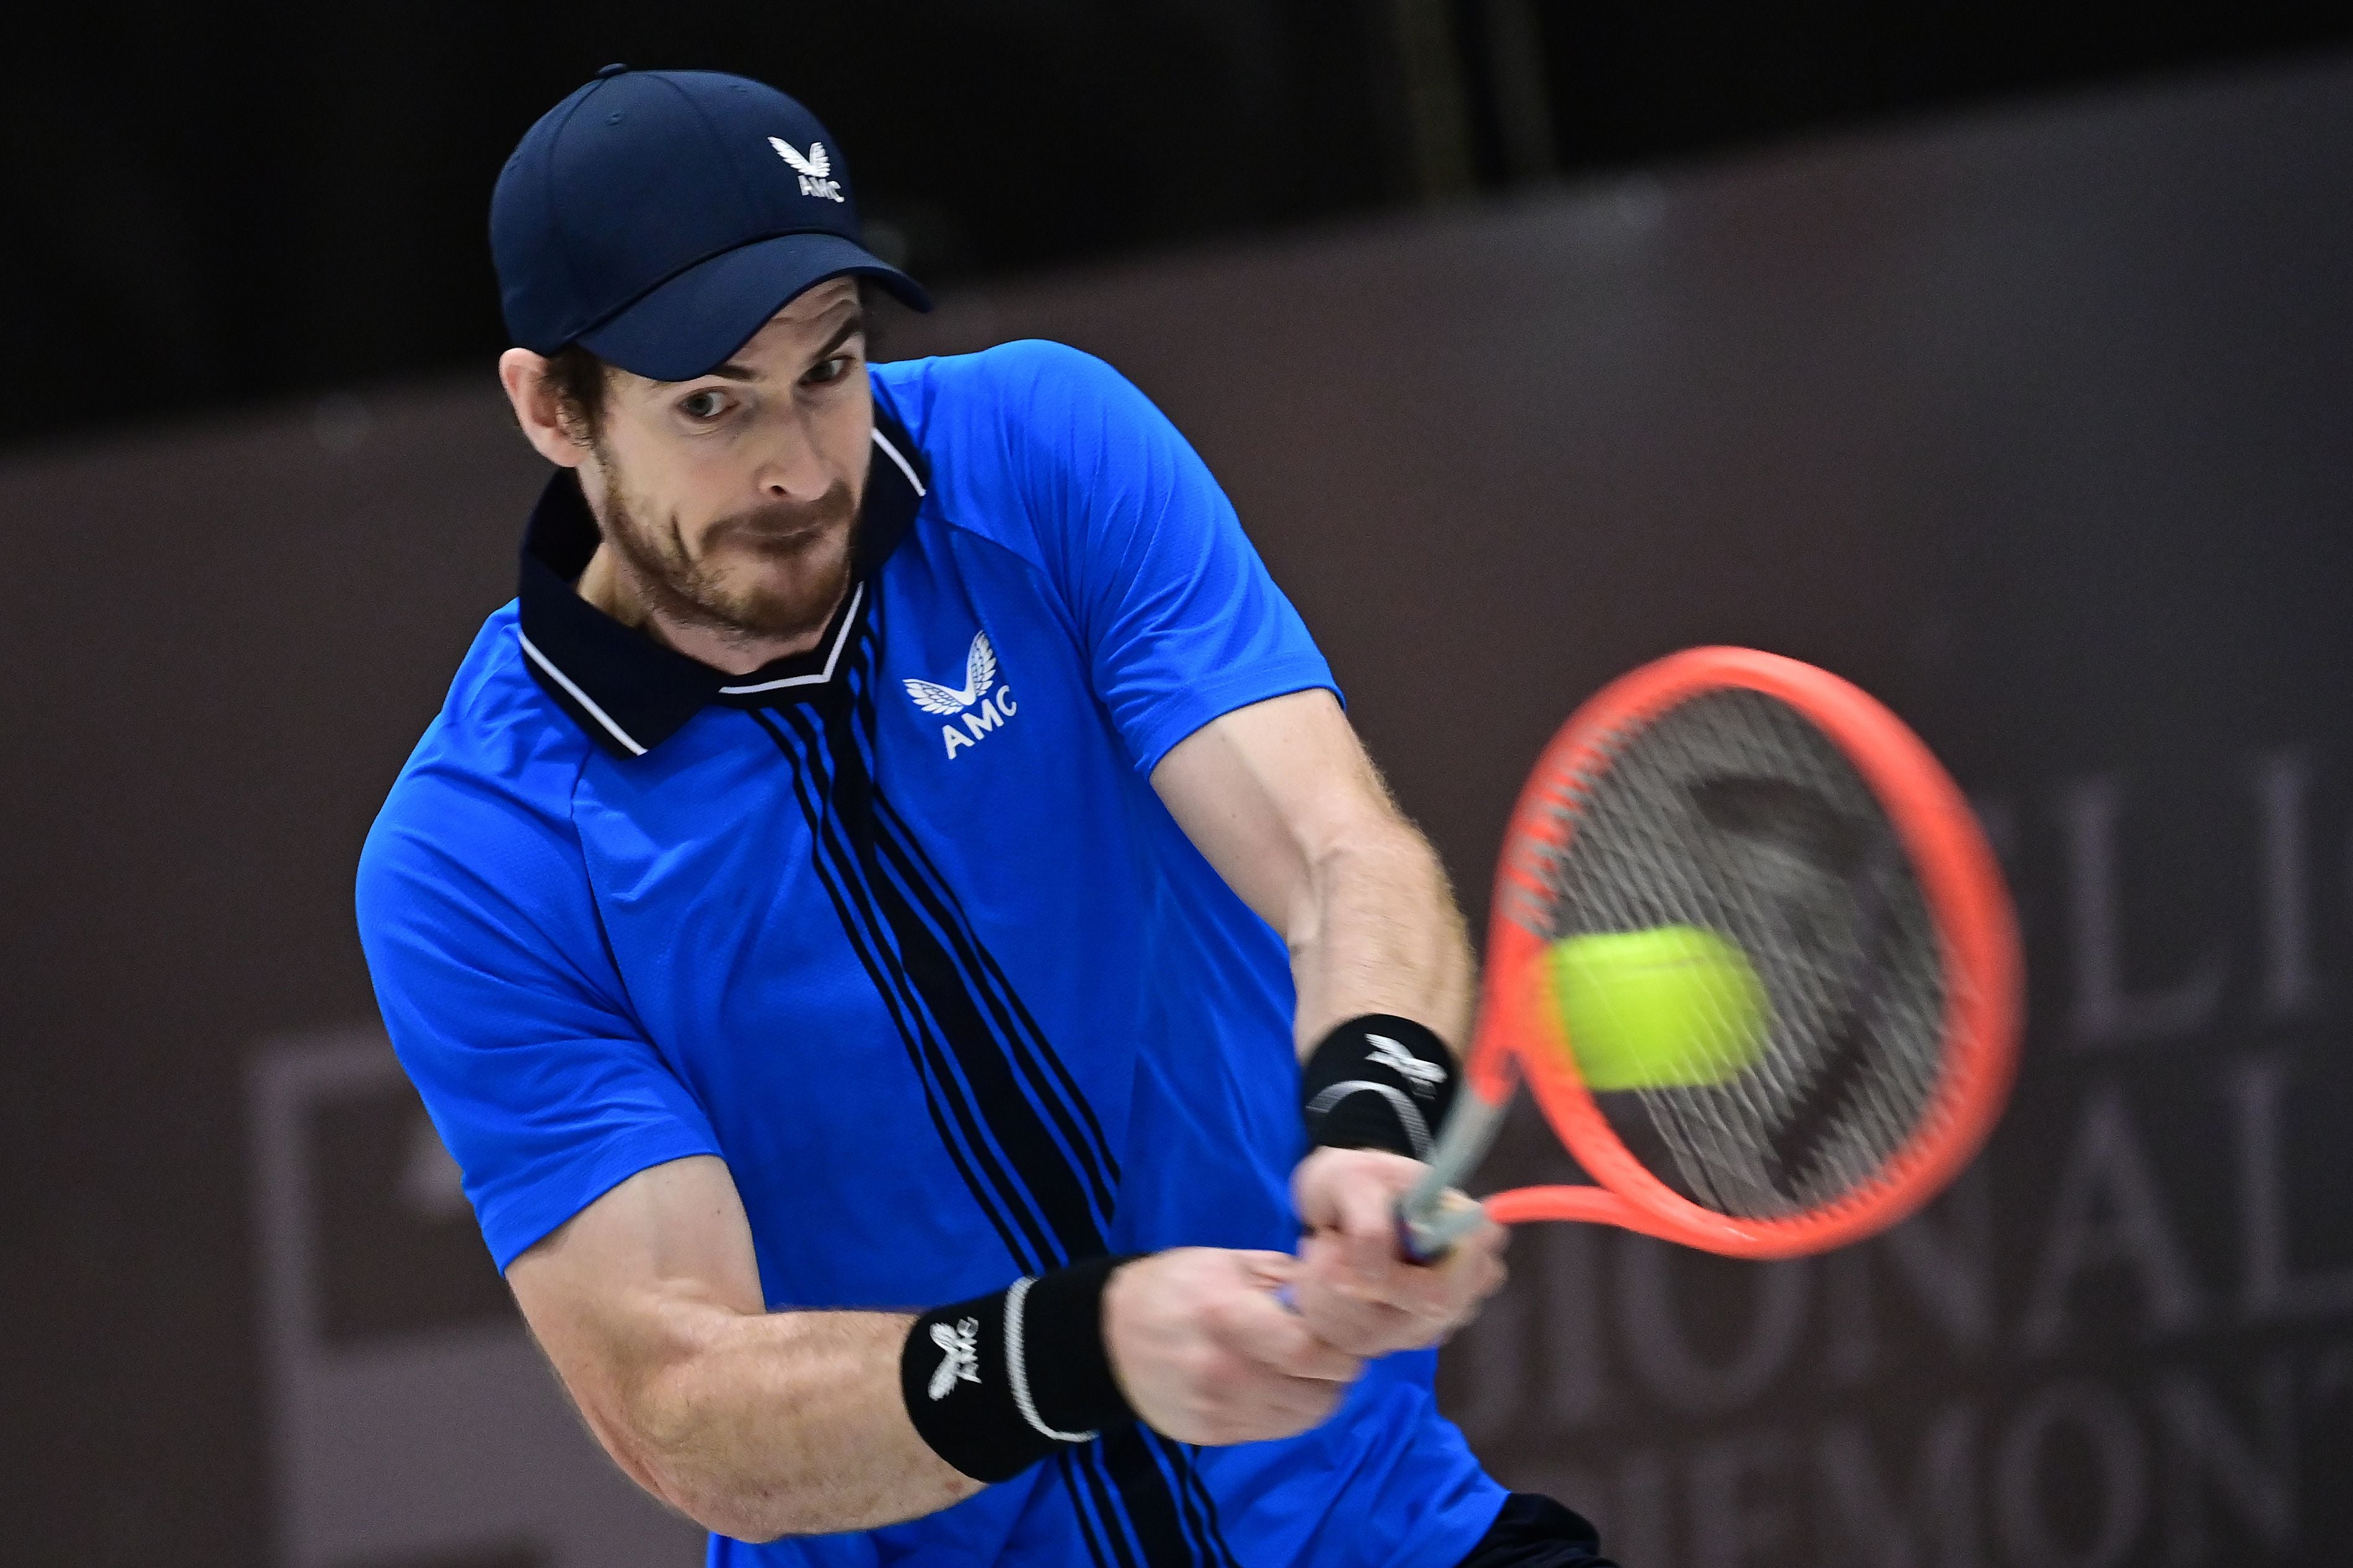 Andy Murray in action during the ATP Challenger tournament in Biella